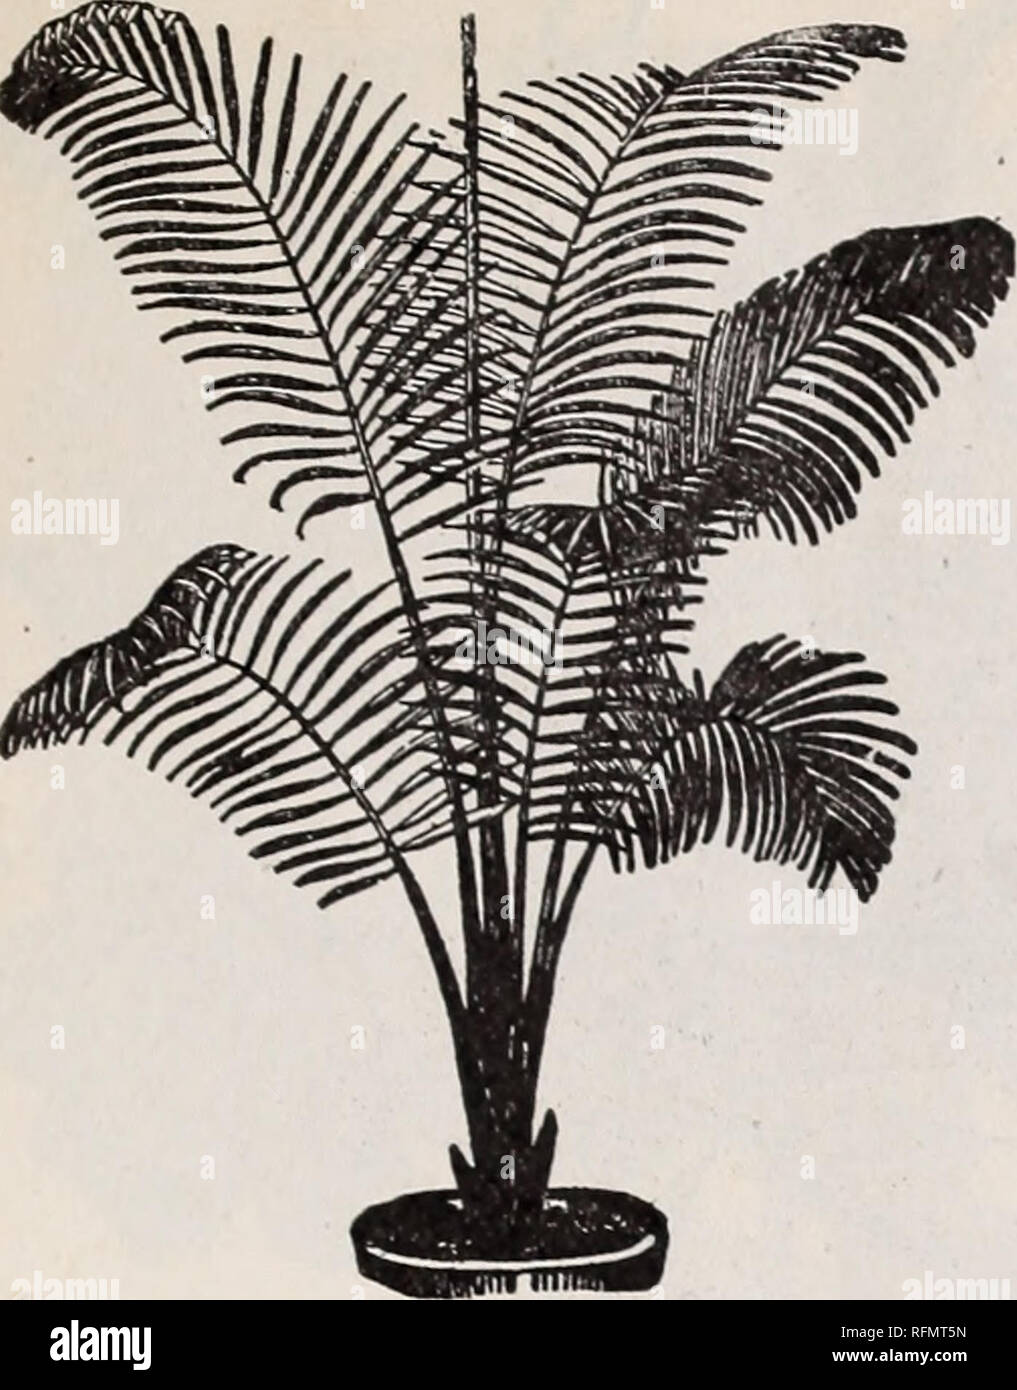 . Floral gems for winter flowering: autumn 1899. Nurseries (Horticulture) Ohio Springfield Catalogs; Plants, Ornamental Catalogs; Flowers Catalogs; Bulbs (Plants) Catalogs. McGregor Brothers, Florists, Springfield, Ohio. 29. Cocos Weddellianao ...PaLMS... Are now indispensable in all decorations, whether for apartments, conservato- ries, or for tropical bedding in the Summer. The following is a select list of the best kinds, and those that are better adapted for house culture. NOTICE—It may be well to state here that young Palms do not resem. ble the illustration given, as they do not show the Stock Photo